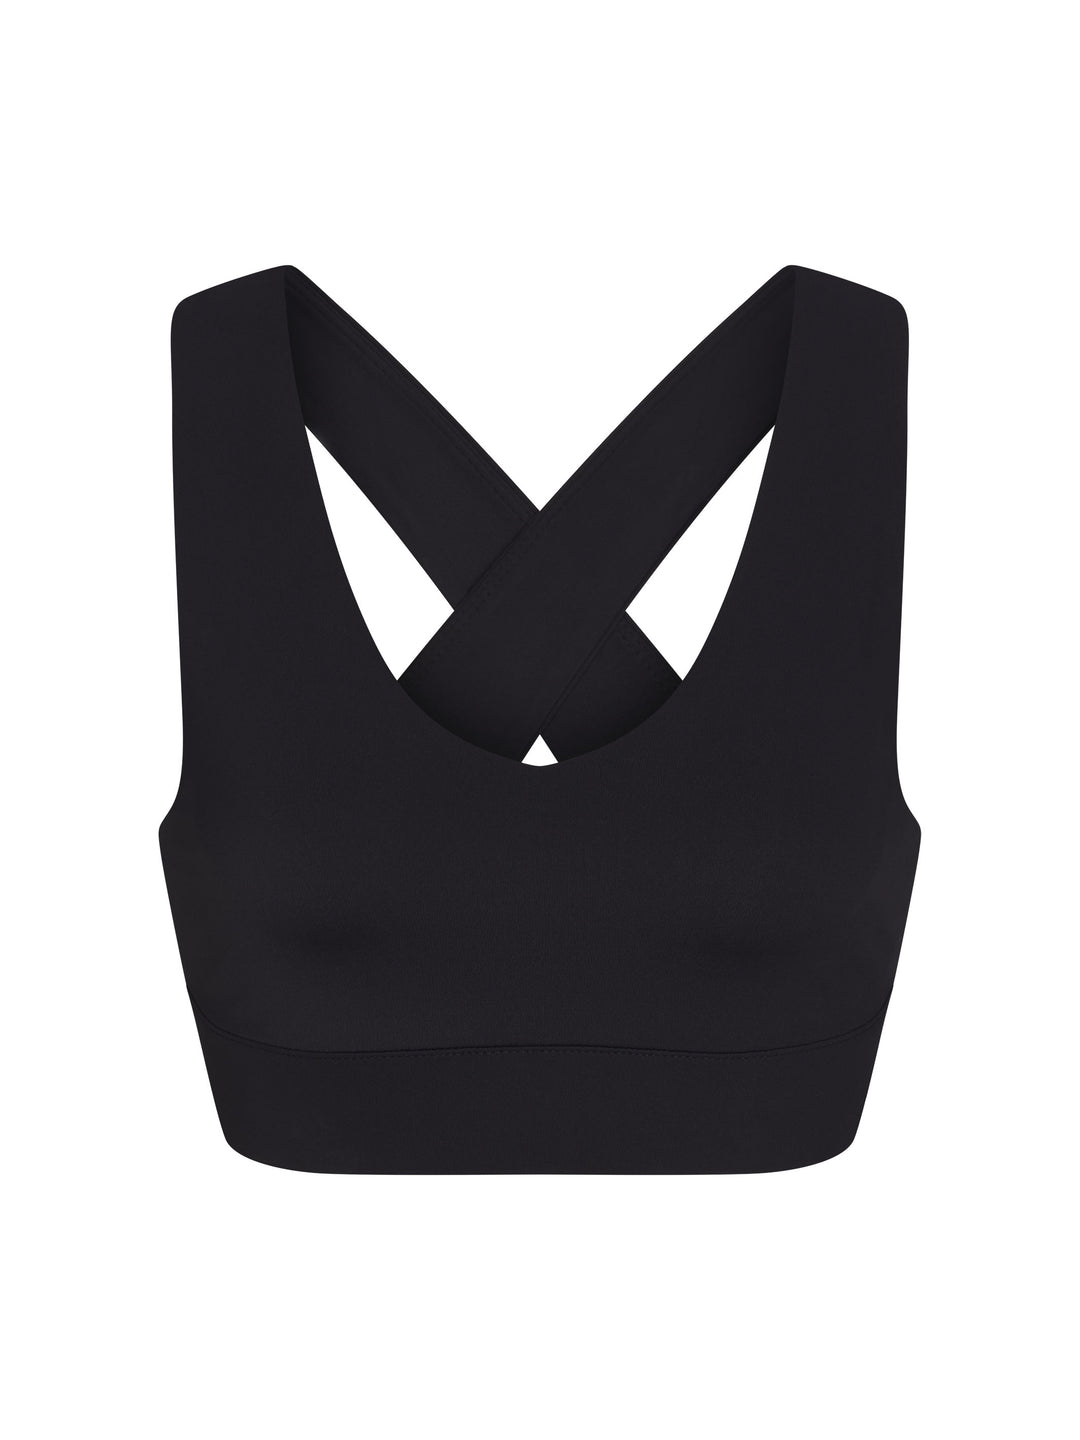 X-Over Back Sports Bra front view in black.